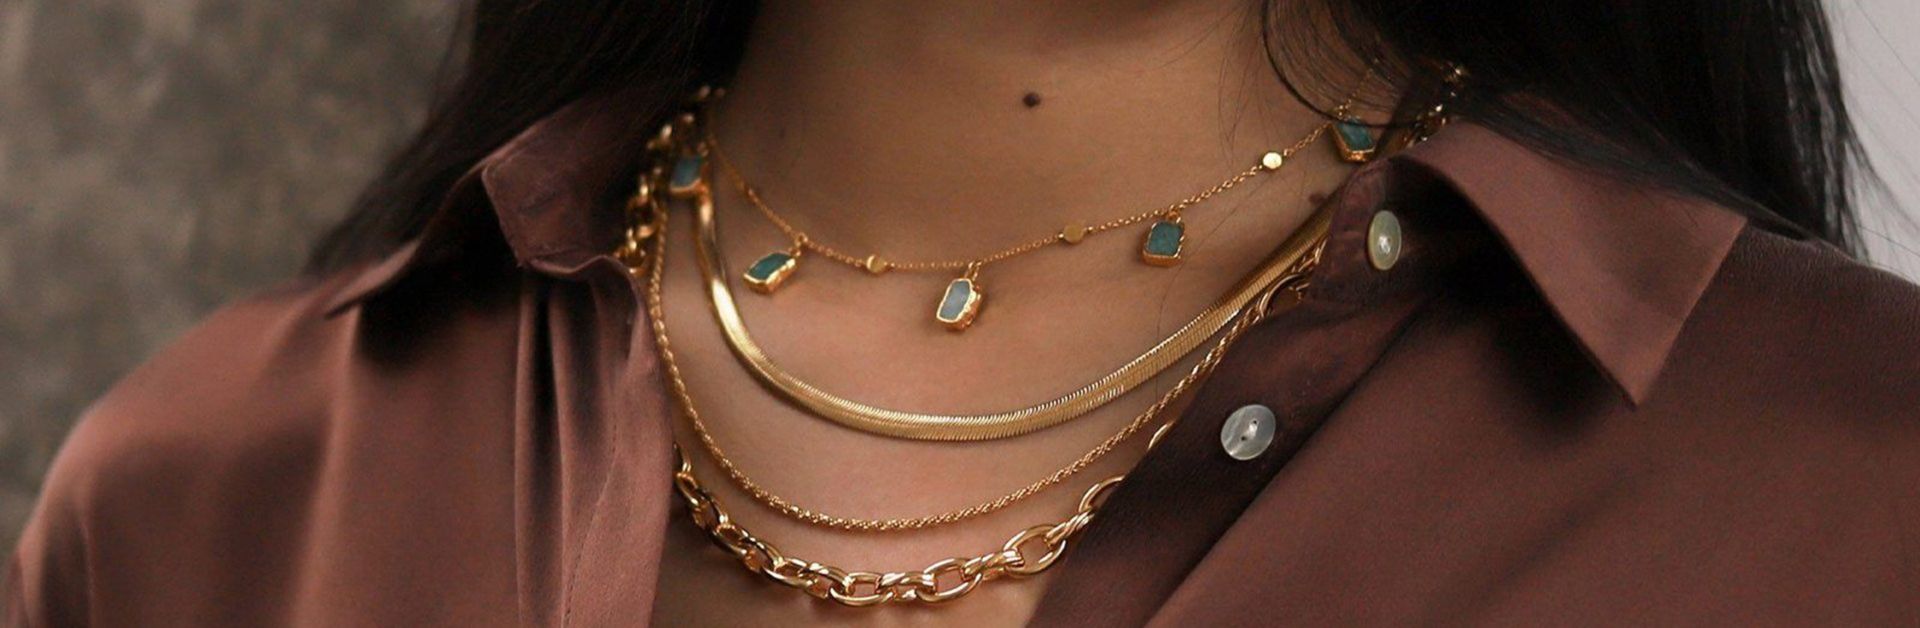 Top 5 necklaces to pick from online fashion jewelry store